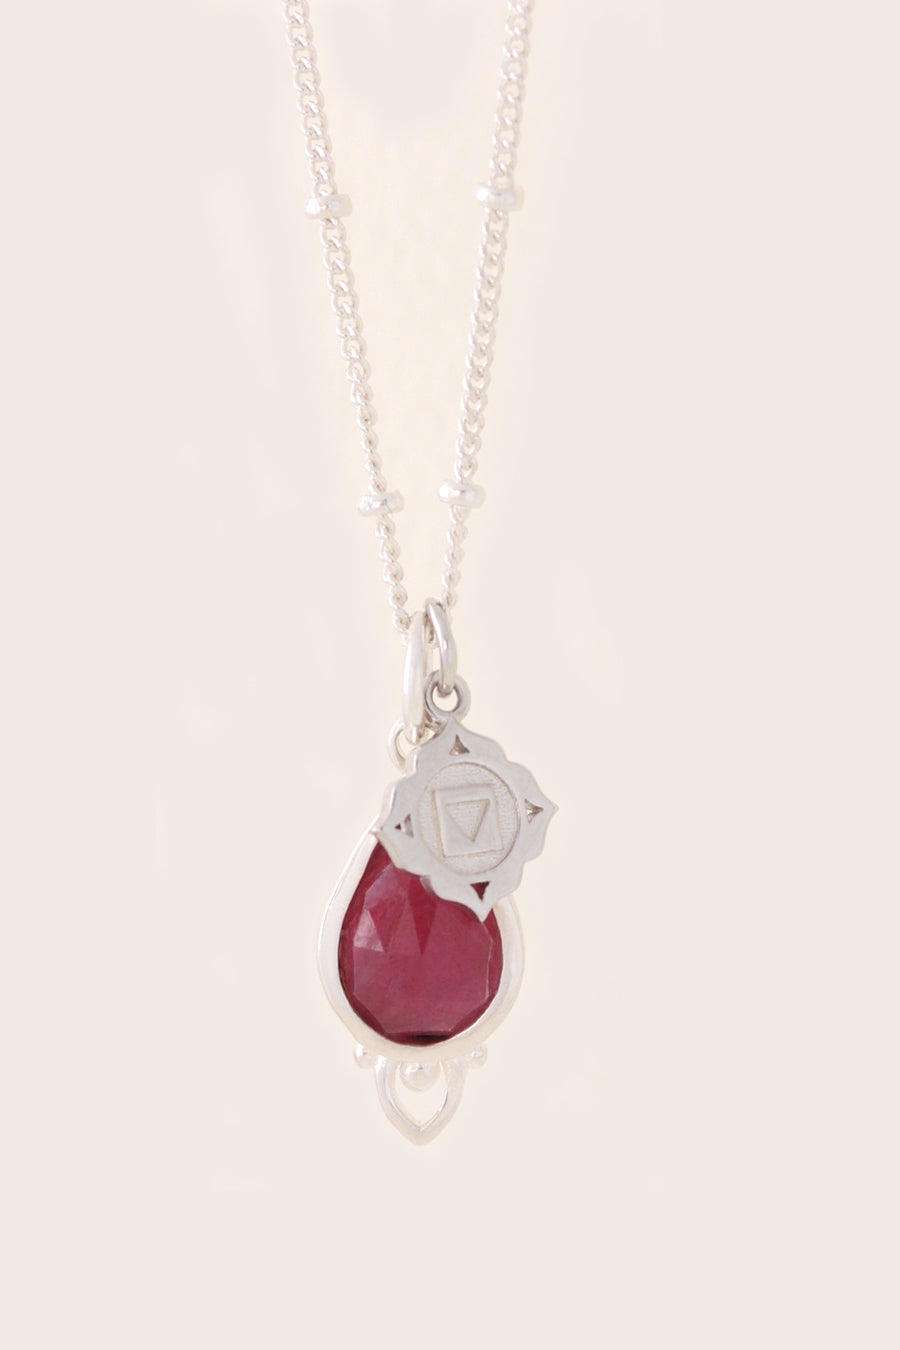 Root Chakra Gemstone Crystal Necklace Meaningful jewellery NZ